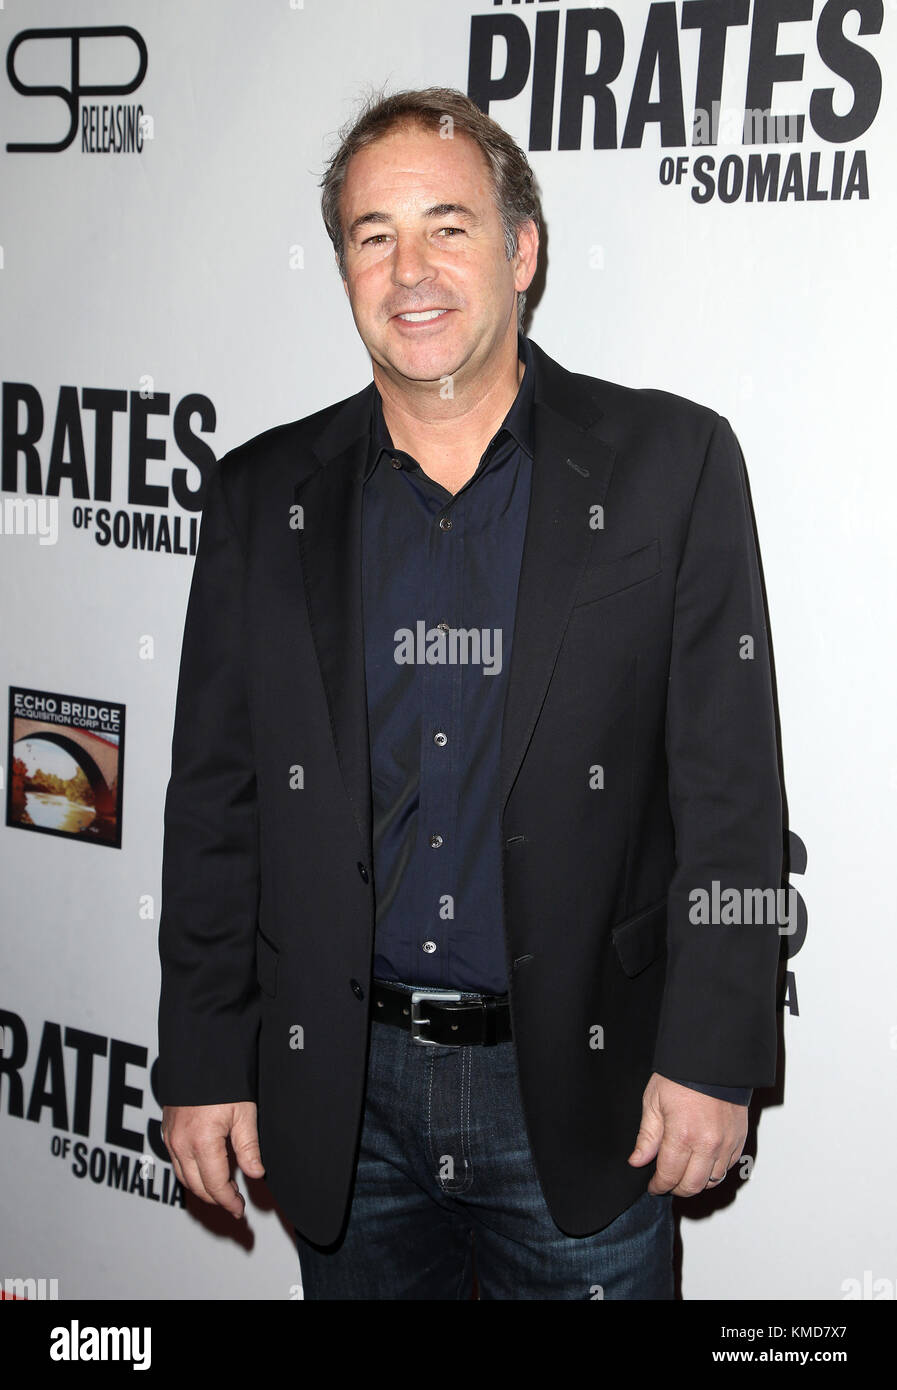 Hollywood, USA. 6th Dec, 2017. Joe Arancio, at Premiere Of Front Row Filmed Entertainment's 'The Pirates Of Somalia' At Holly Lodge' at TCL Chinese 6 Theatres in Hollywood, USA on December 6, 2017. Credit: Faye Sadou/Media Punch/Alamy Live News Stock Photo